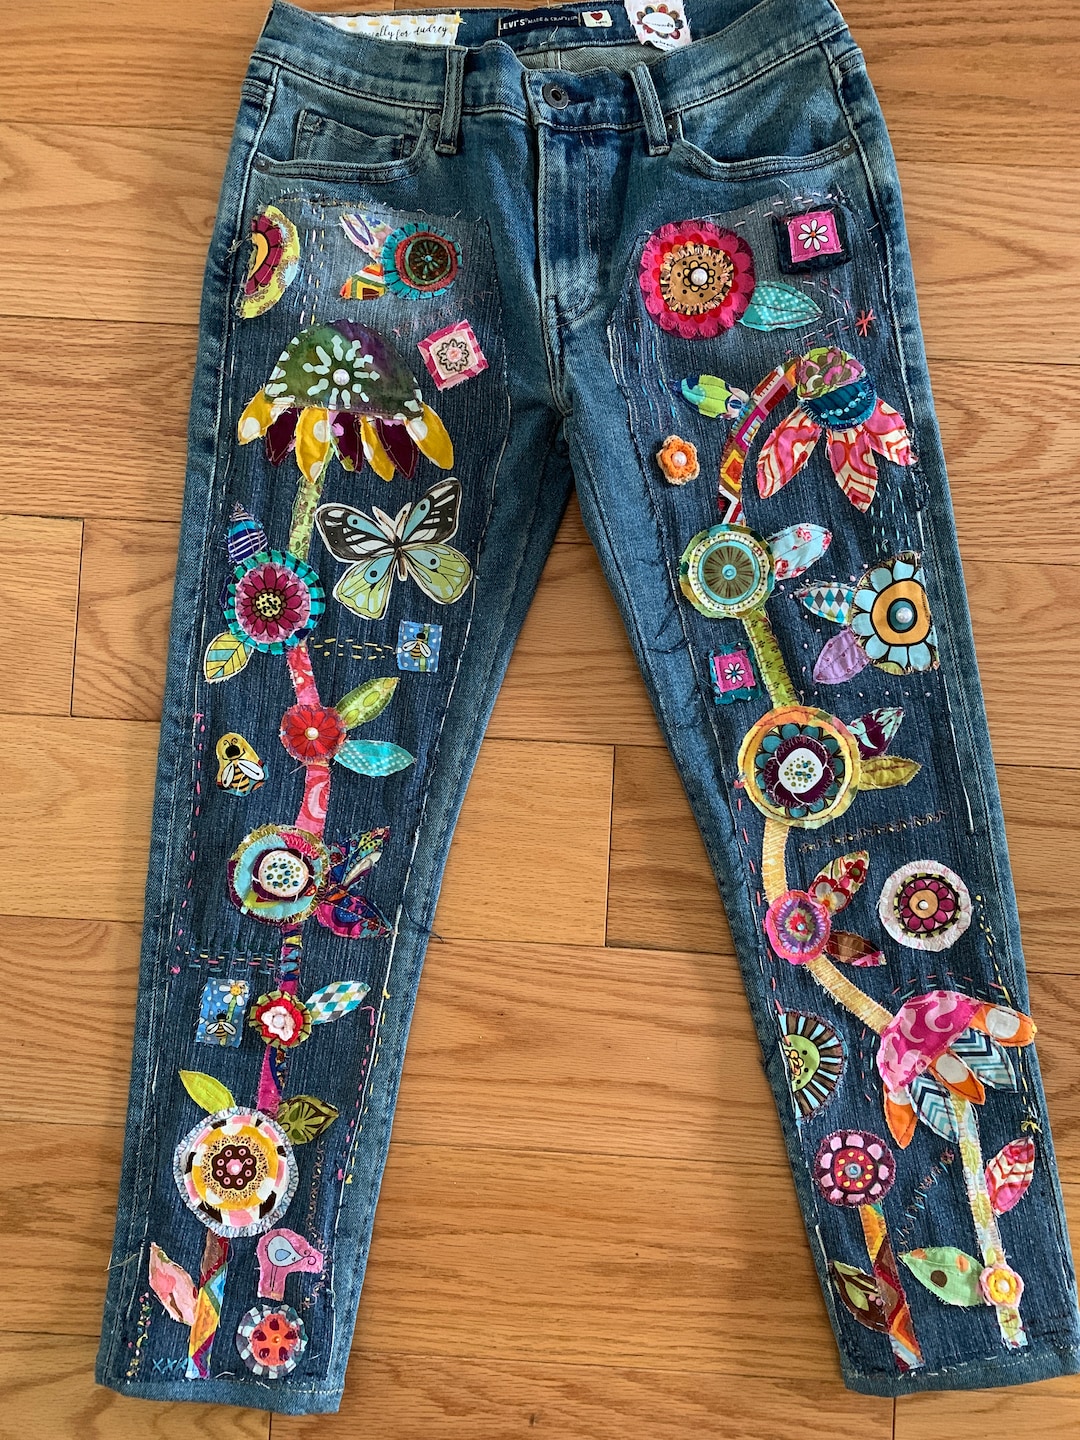 SewUnruly Hippie Boho Denim Patchwork Jeans Made to Order Recycled Retro Distressed Jeans Music Festival